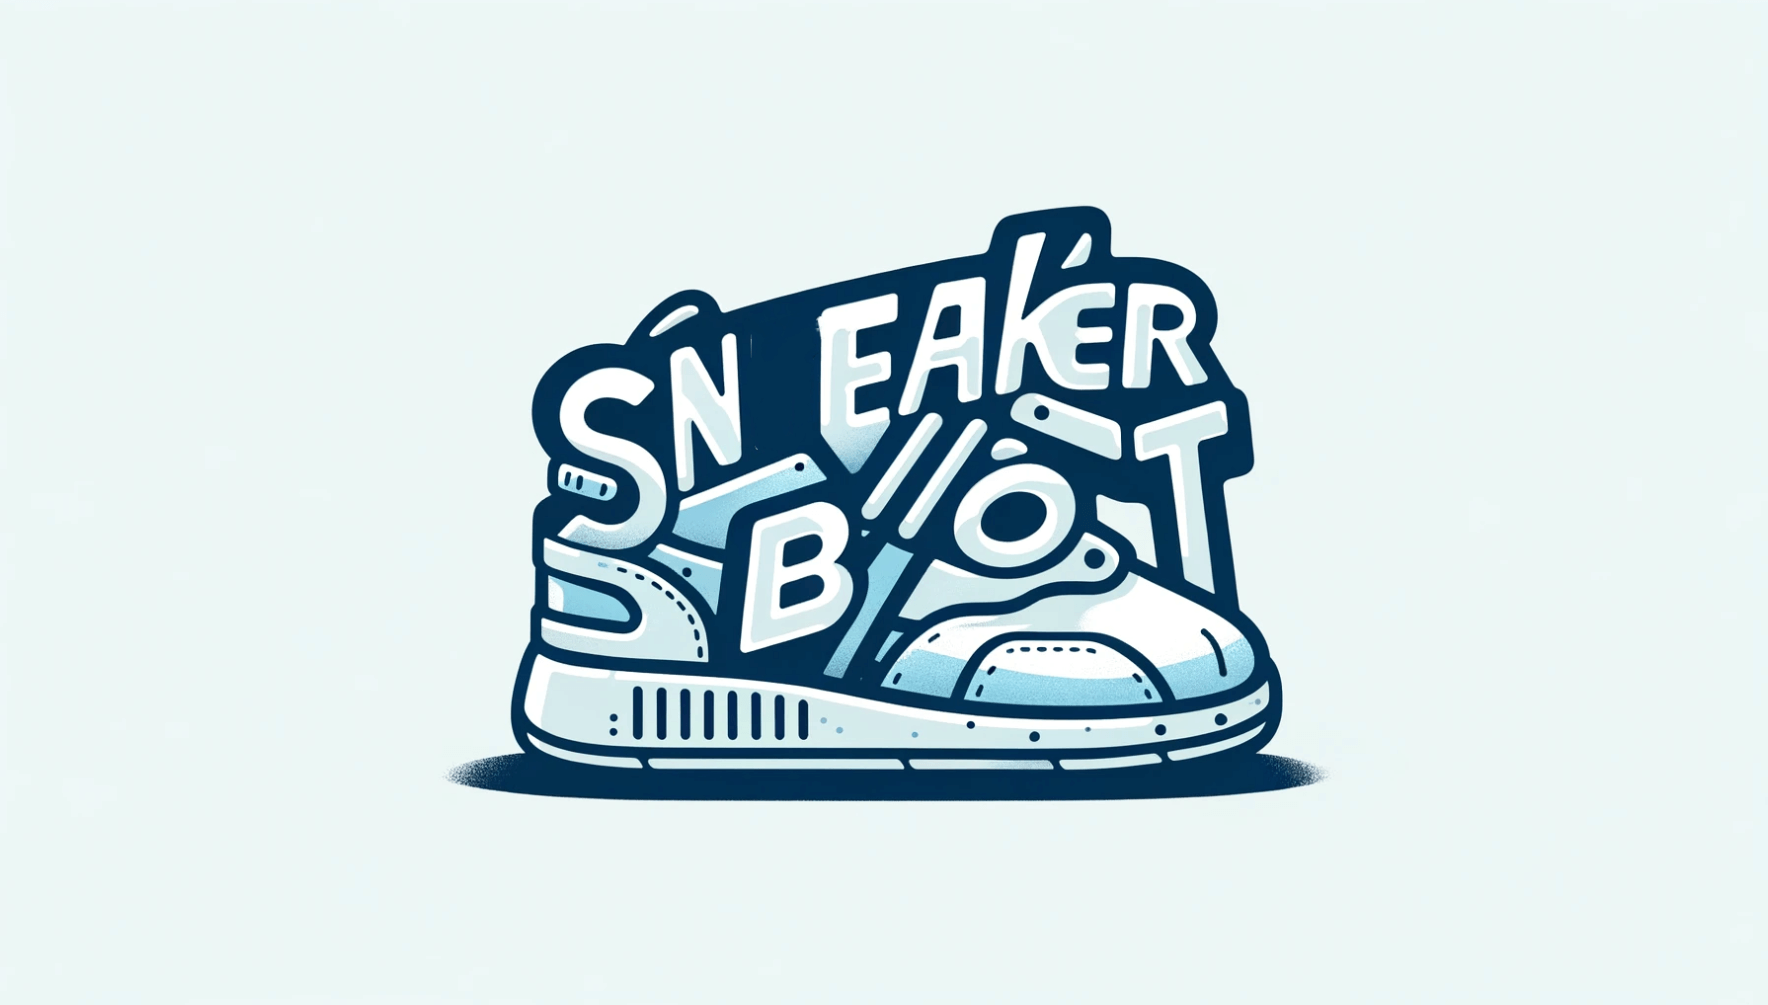 What are Sneaker Bots